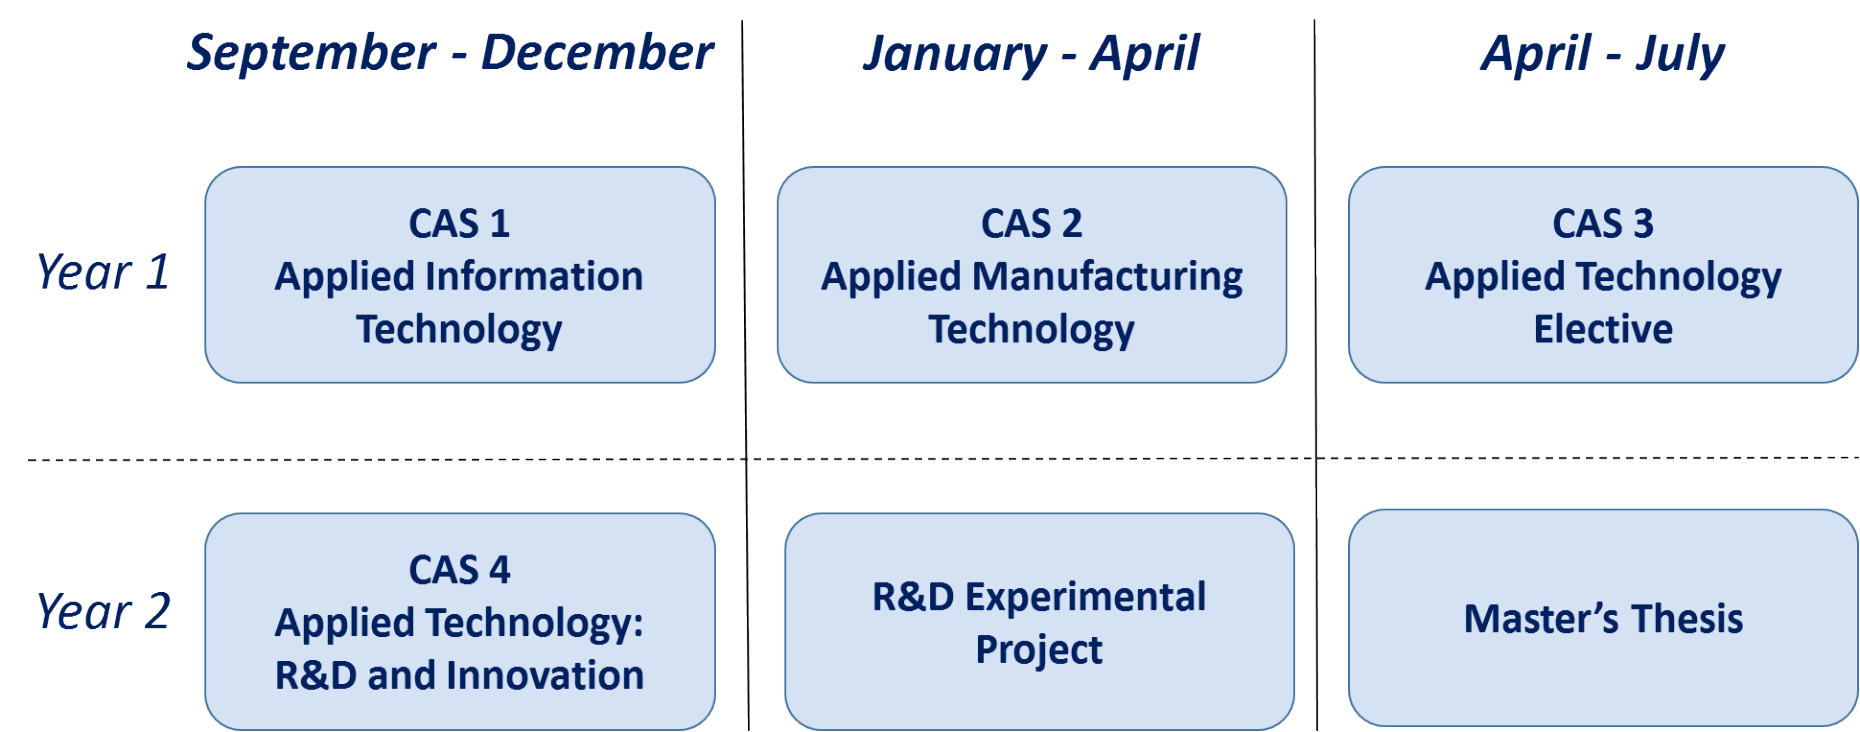 Image showing sequence of MAS over two years. First year September to December is CAS 1 Applied Information Technology. First Year January to April is CAS 2 Applied Manufacturing Technology. First year April to July is CAS 3 Applied Technology Elective. Second year September to December is CAS 4 Applied Technology: R&D and Innovation. Second year January to April is R&D Experimental Project. Second year April to July is the Master's thesis.